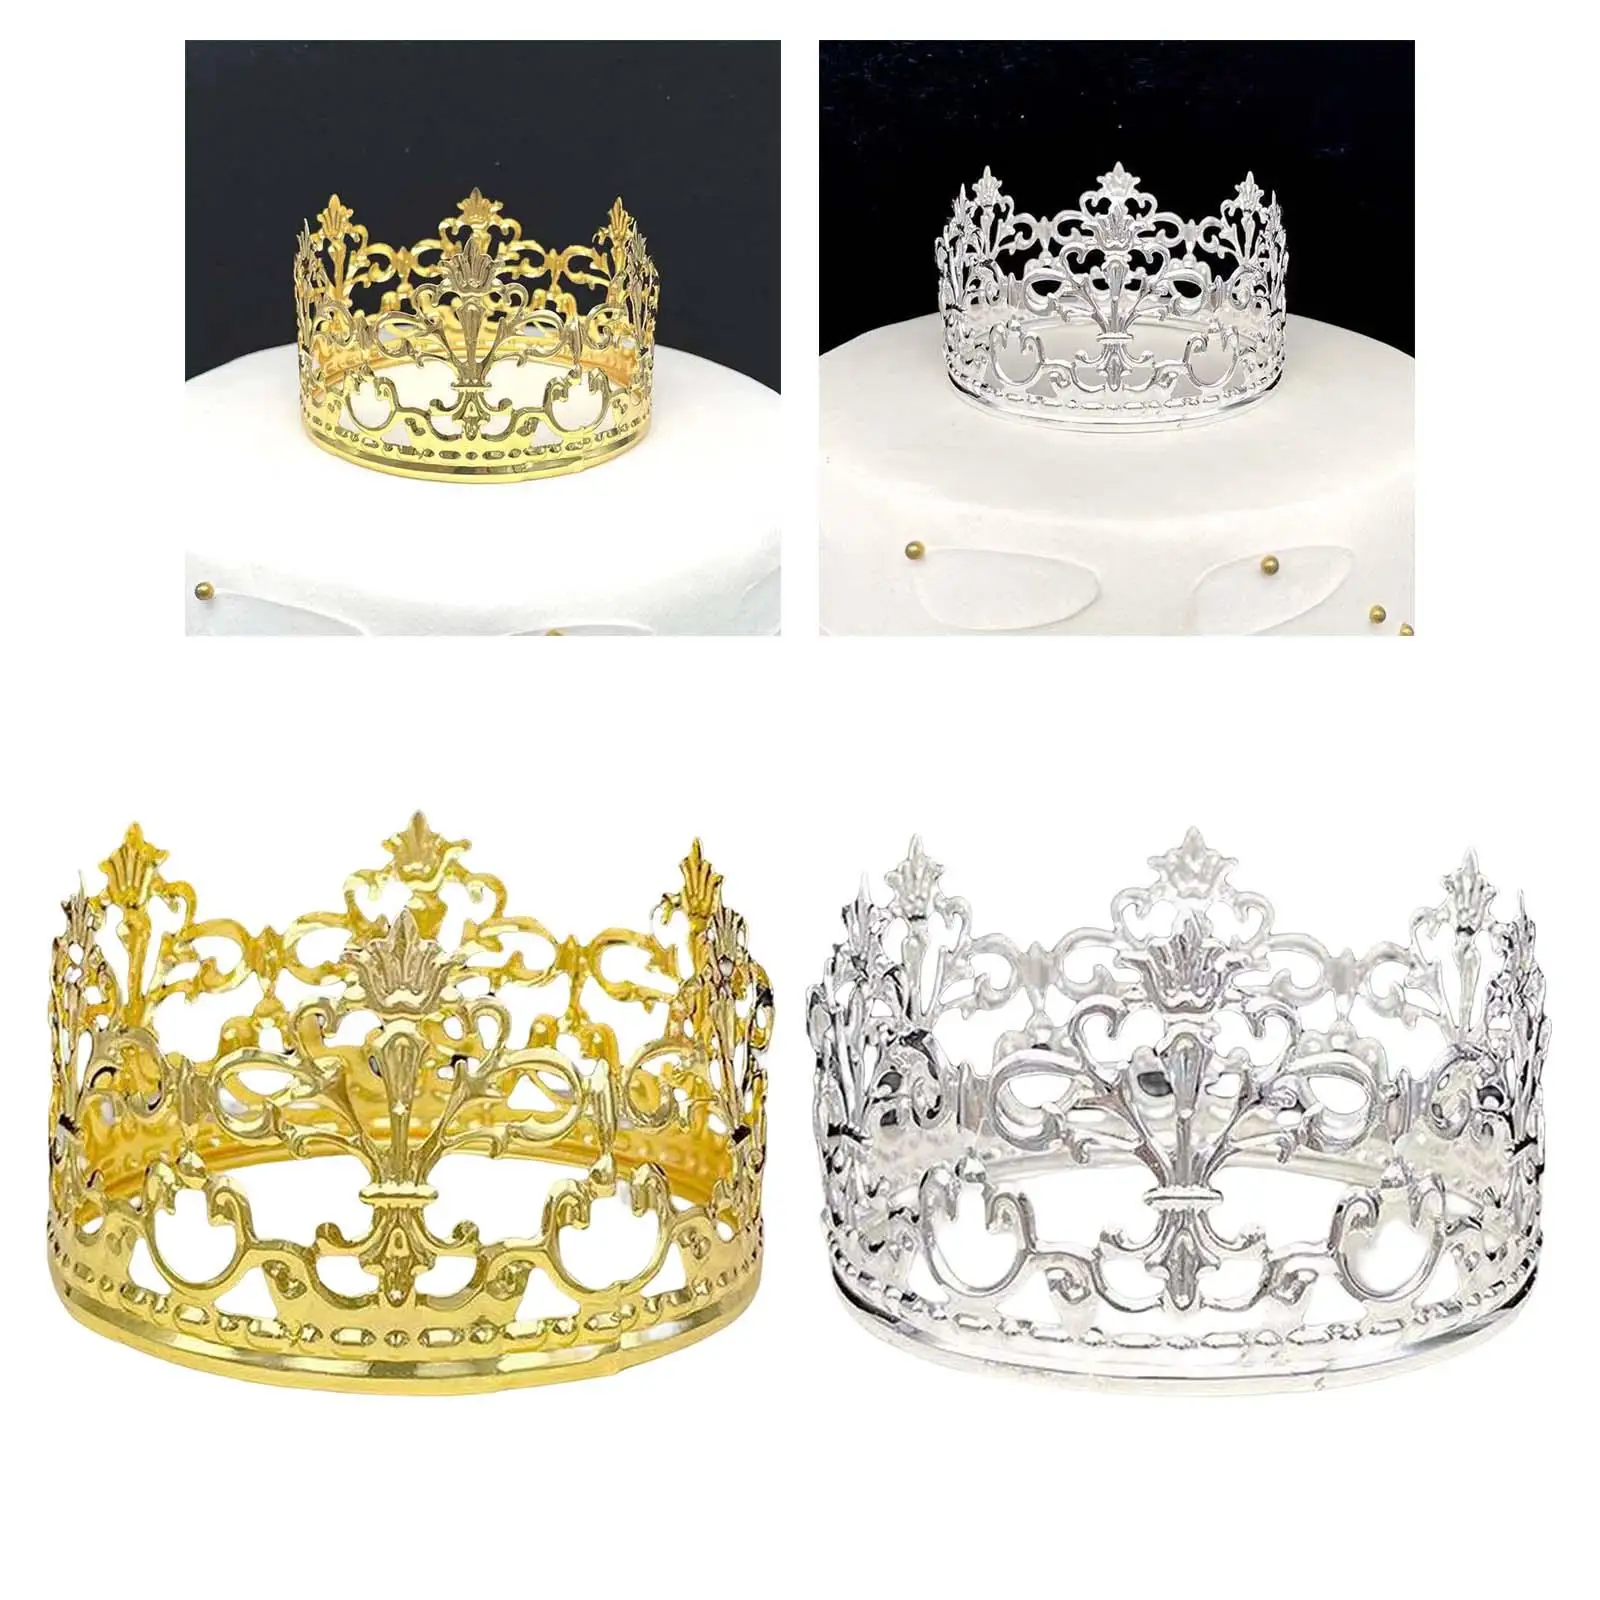 Crown Cake Topper Cake Decorations Vintage Style Iron Headpieces Queen Crown Headband for Women Photography Props Birthday Party